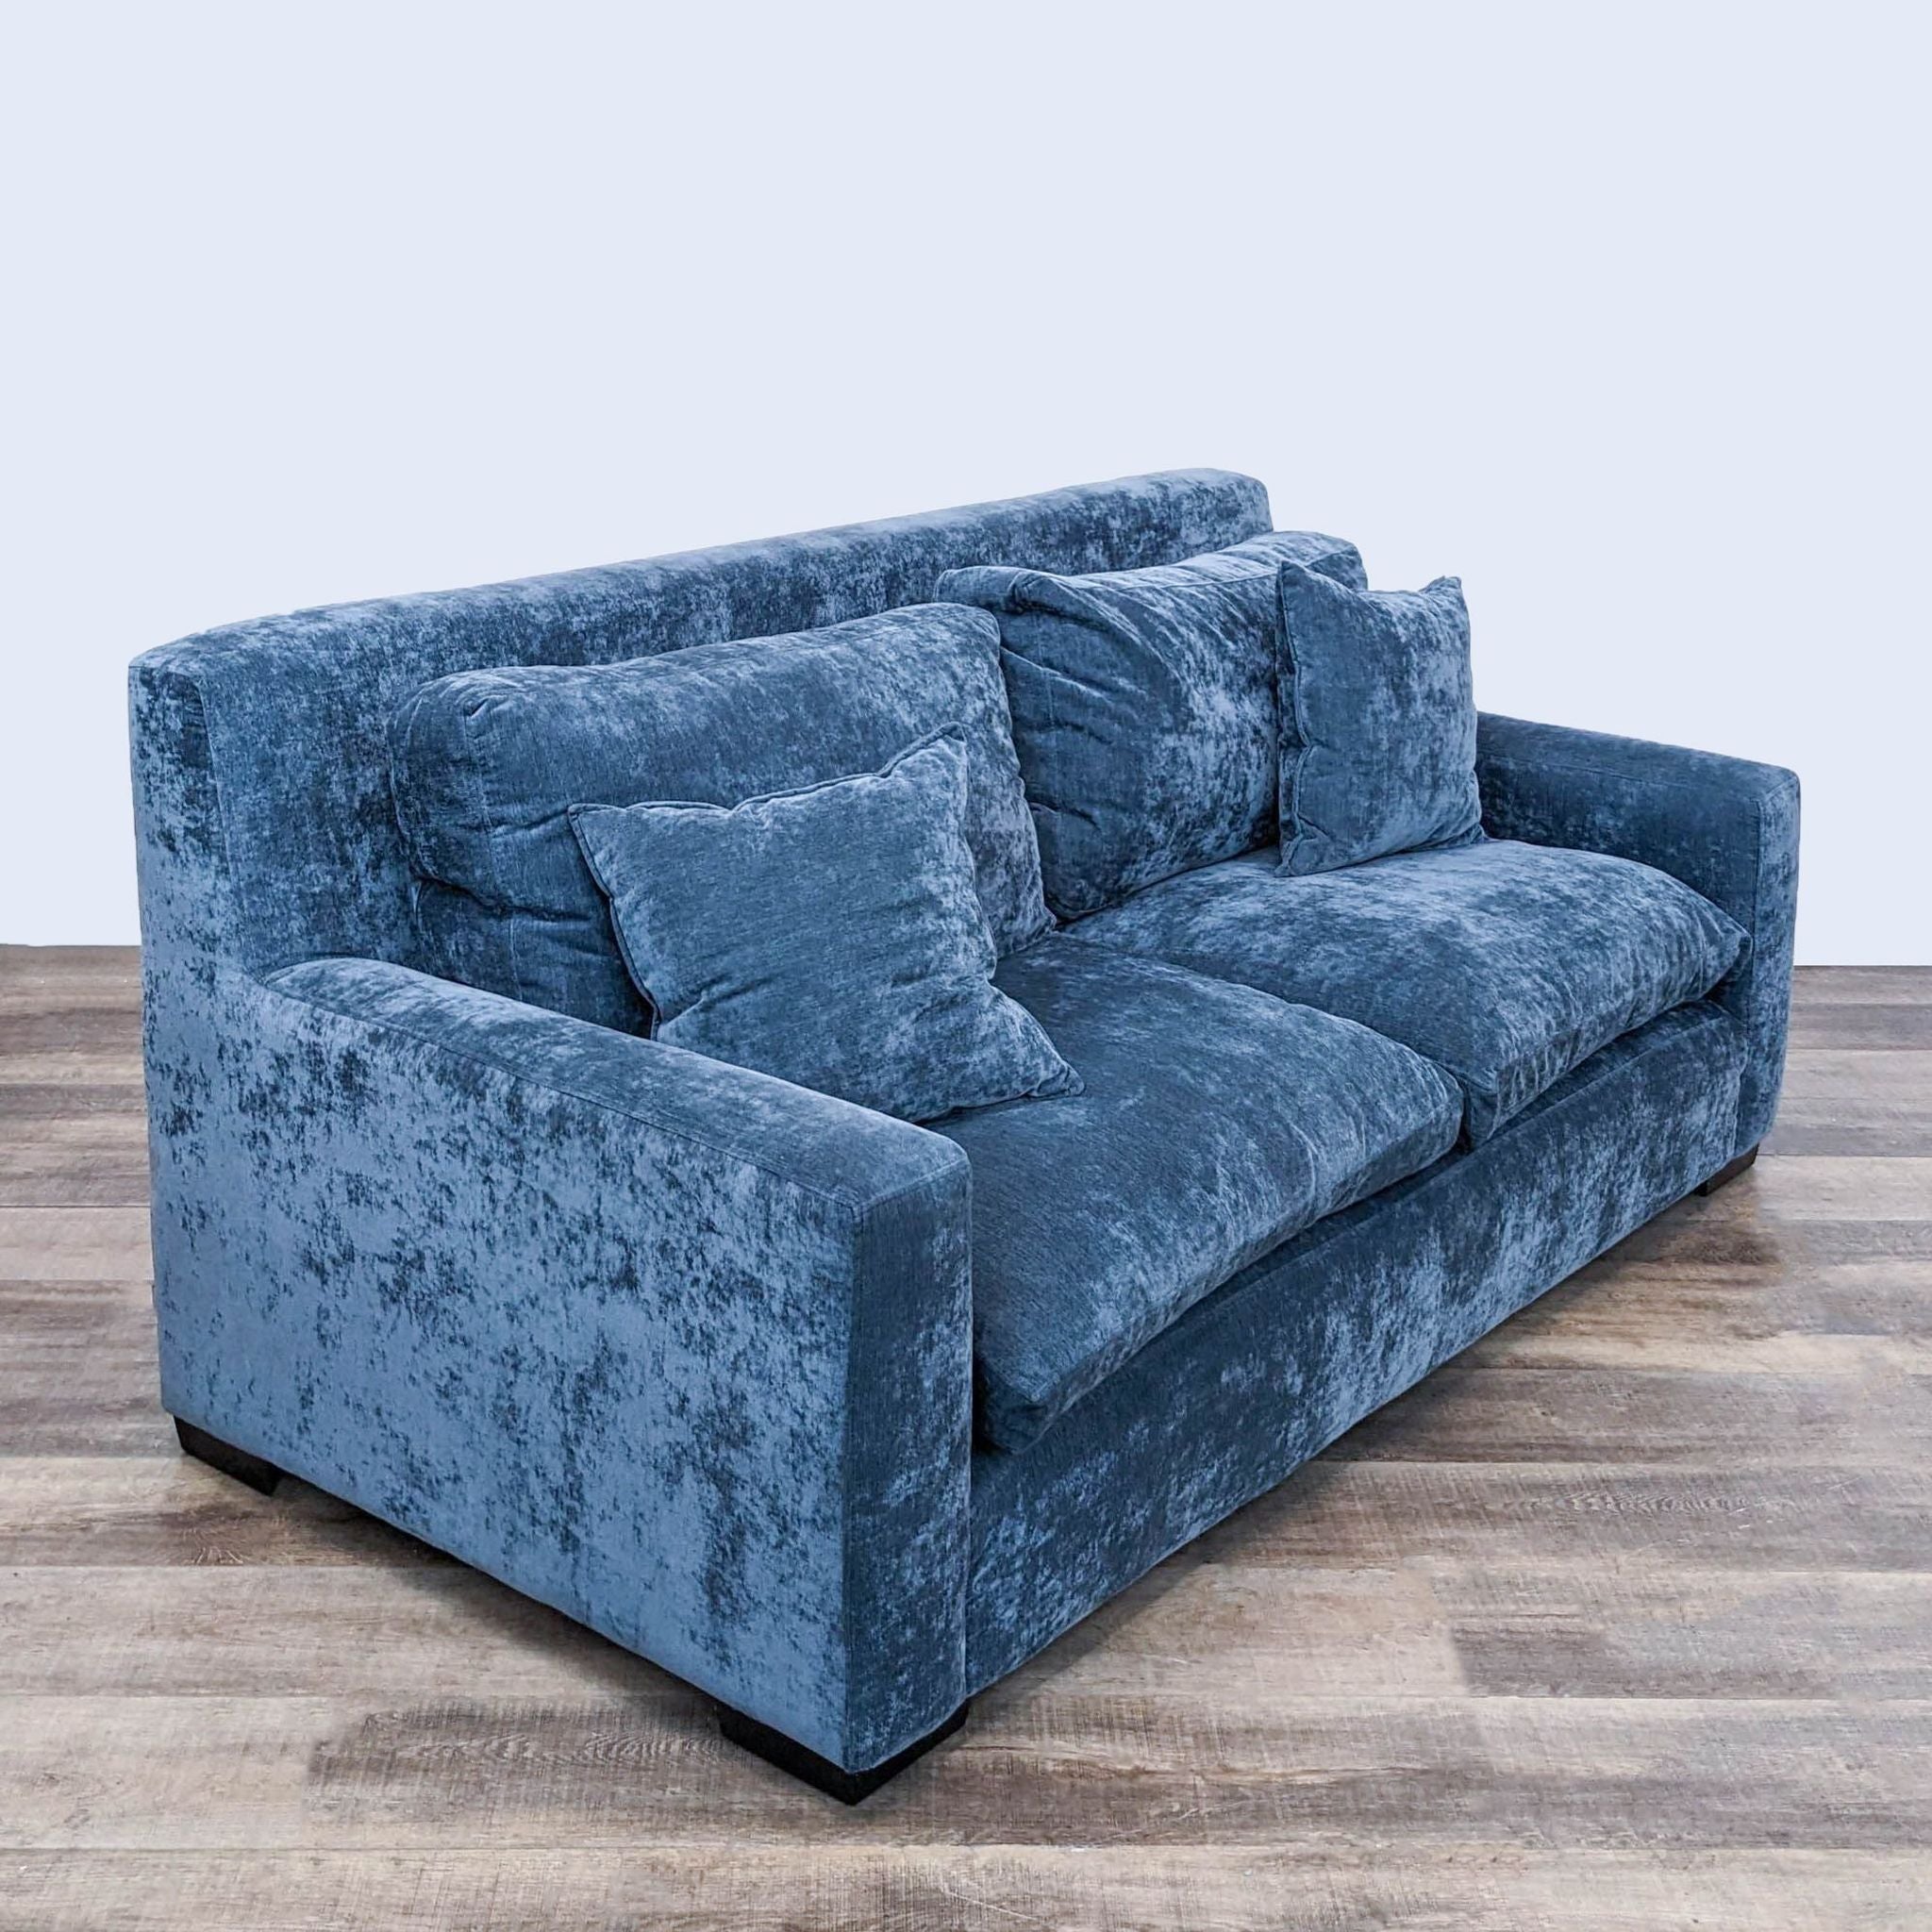 Alt text 2: Angled view of a plush blue Harvest Furniture sofa, showcasing its transitional styling and comfortable three-seat design.